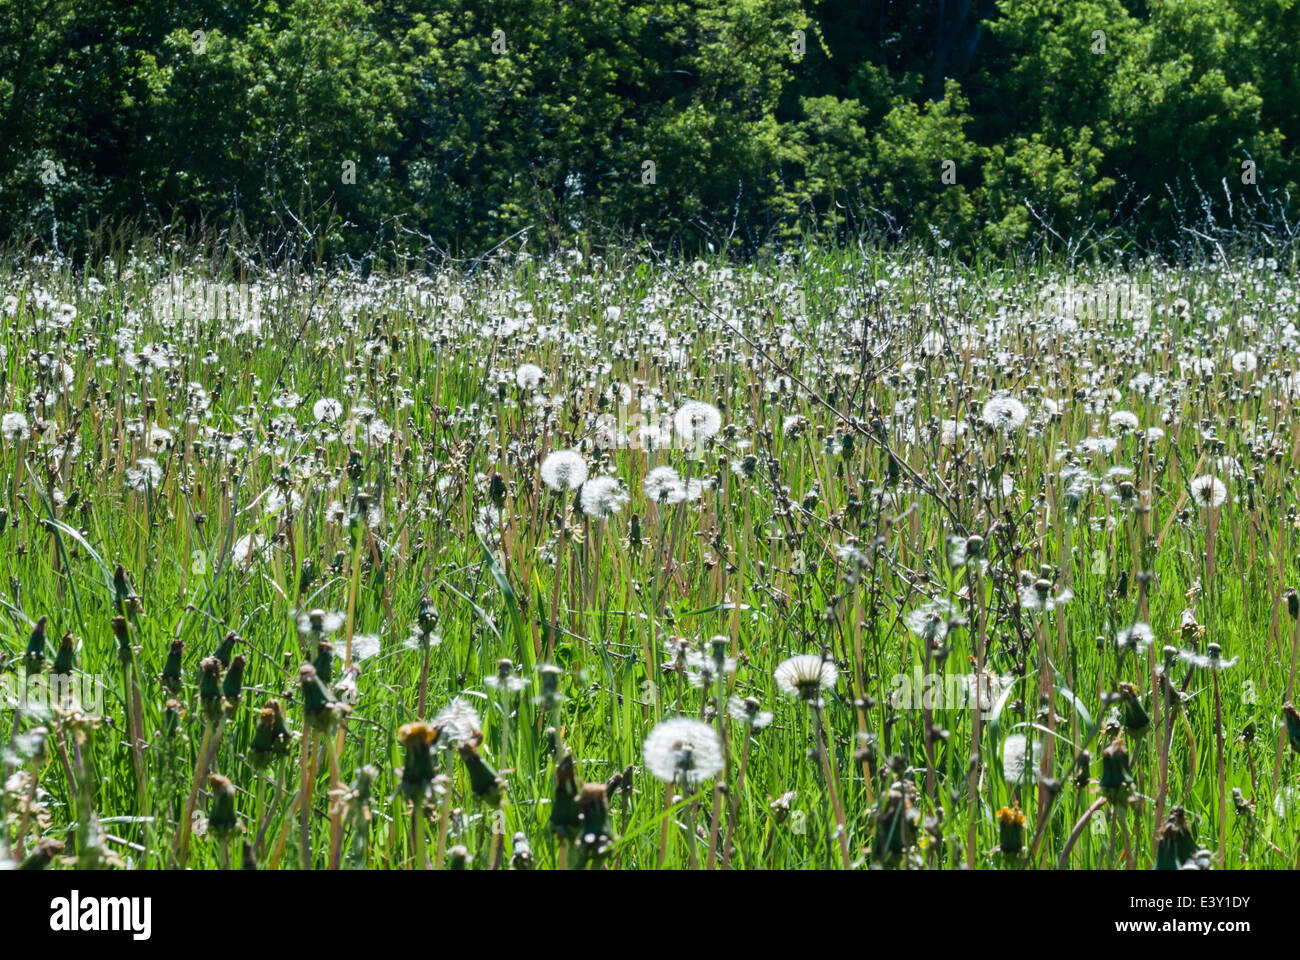 Field of dandelions at various stages of bloom against forest. Stock Photo